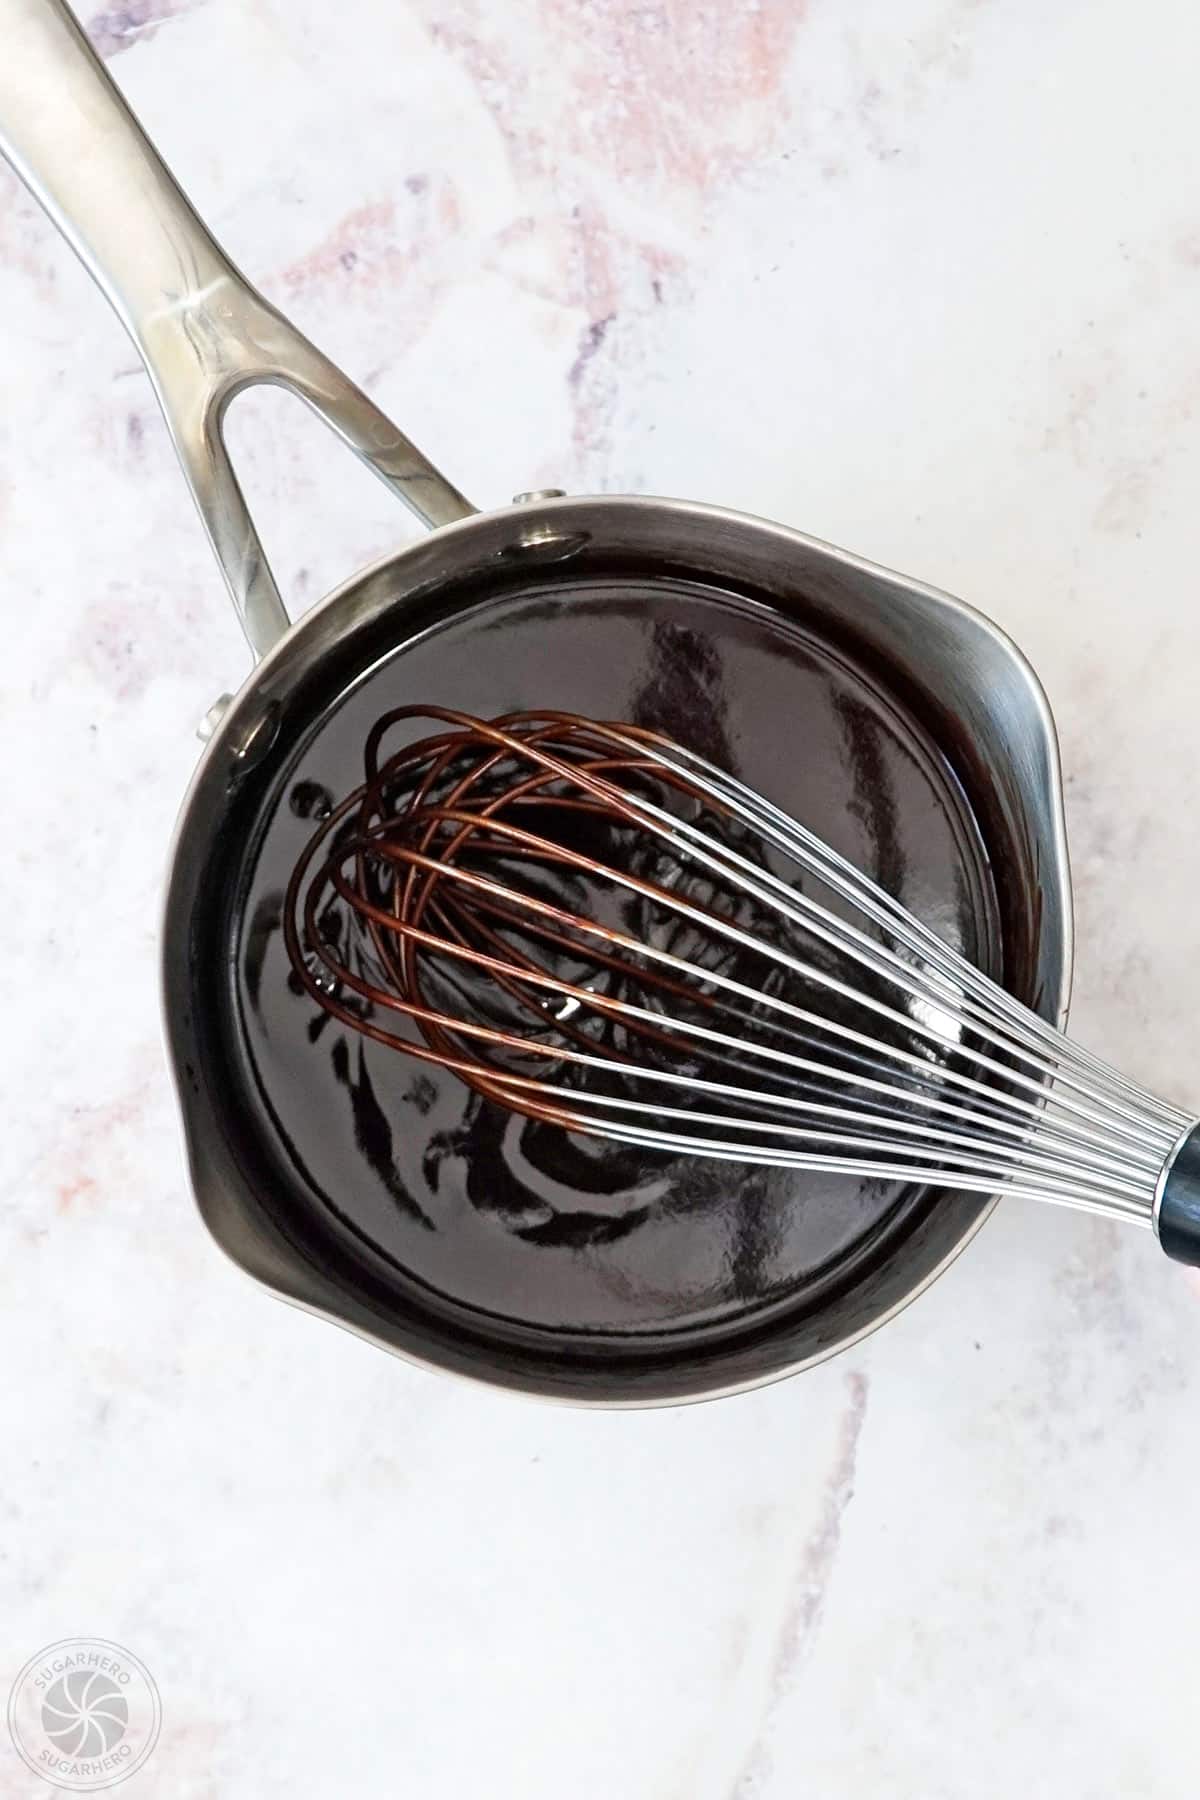 Smooth chocolate spread mixture in a saucepan with a whisk.